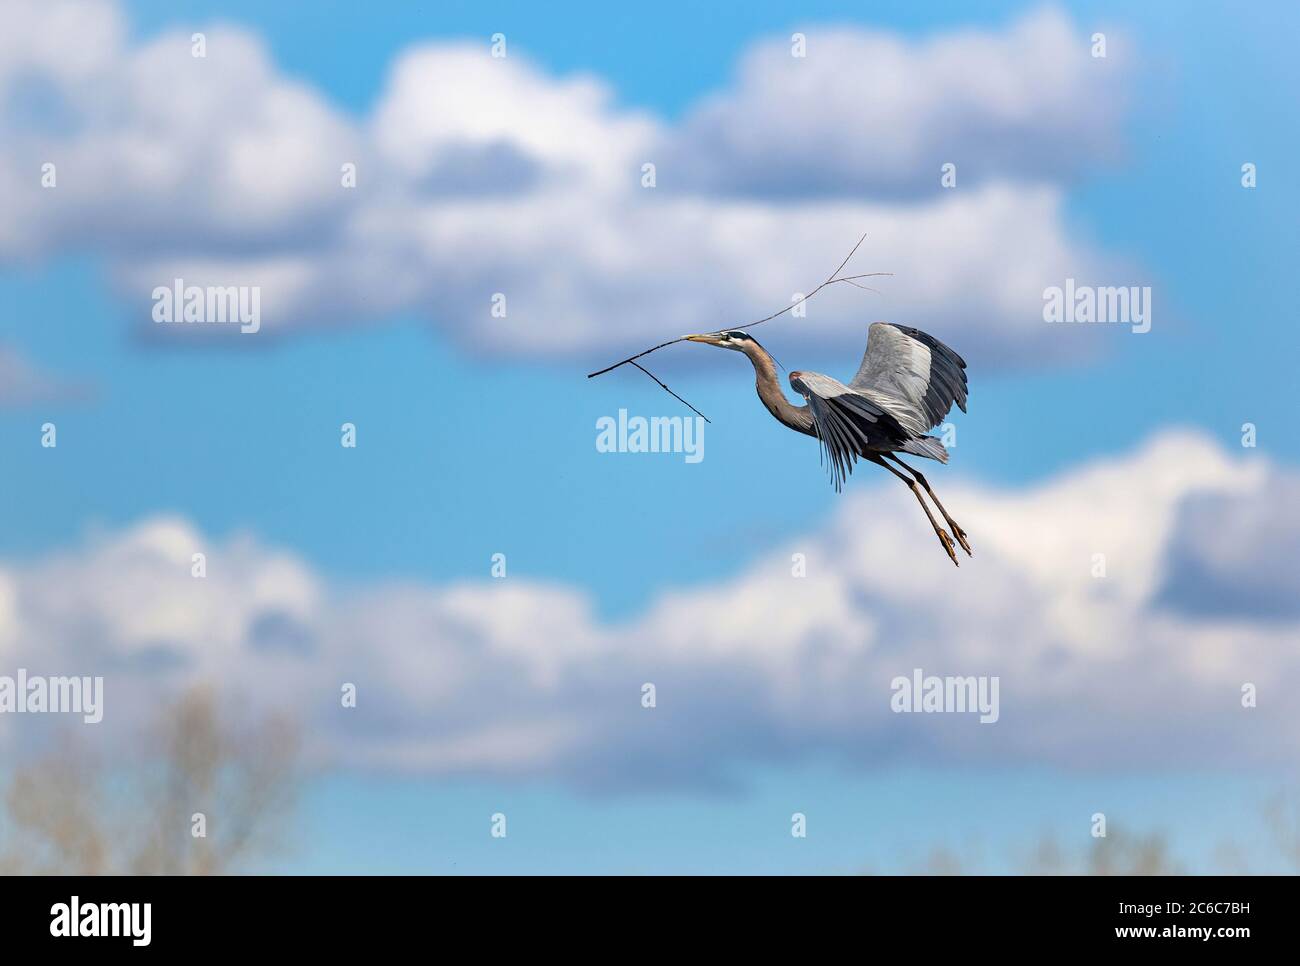 A Great Blue Heron carries a long stick to his nest, on a beautiful Spring day in Colorado, with fluffy white clouds and a pretty blue sky. Stock Photo